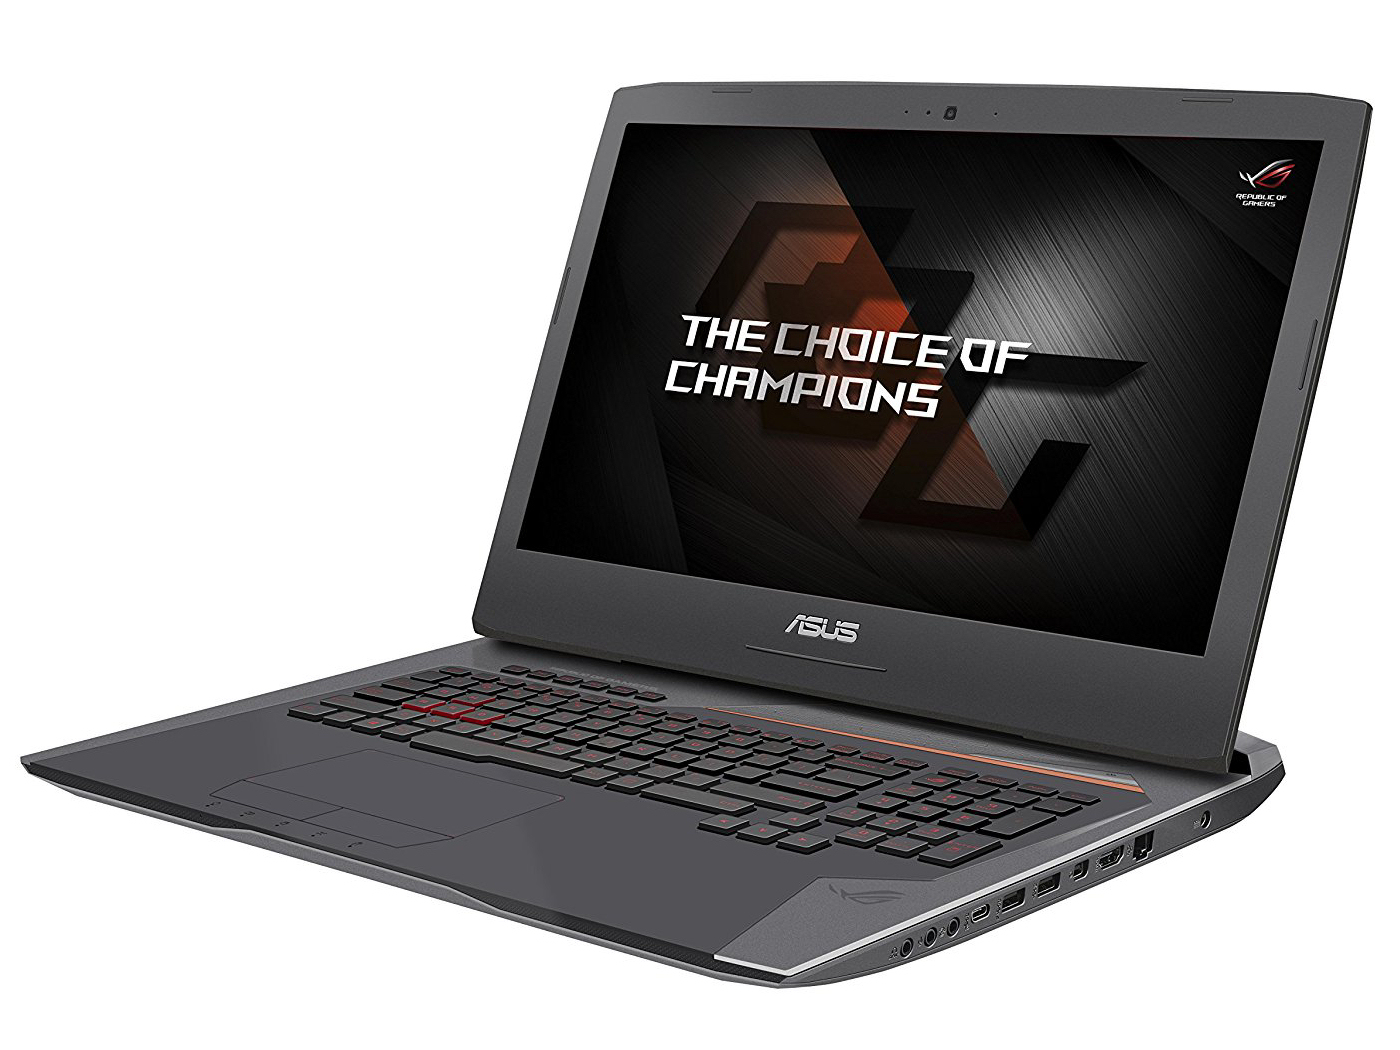 Top 10 Gaming-Notebooks im Test bei Notebookcheck - Notebookcheck.com Tests